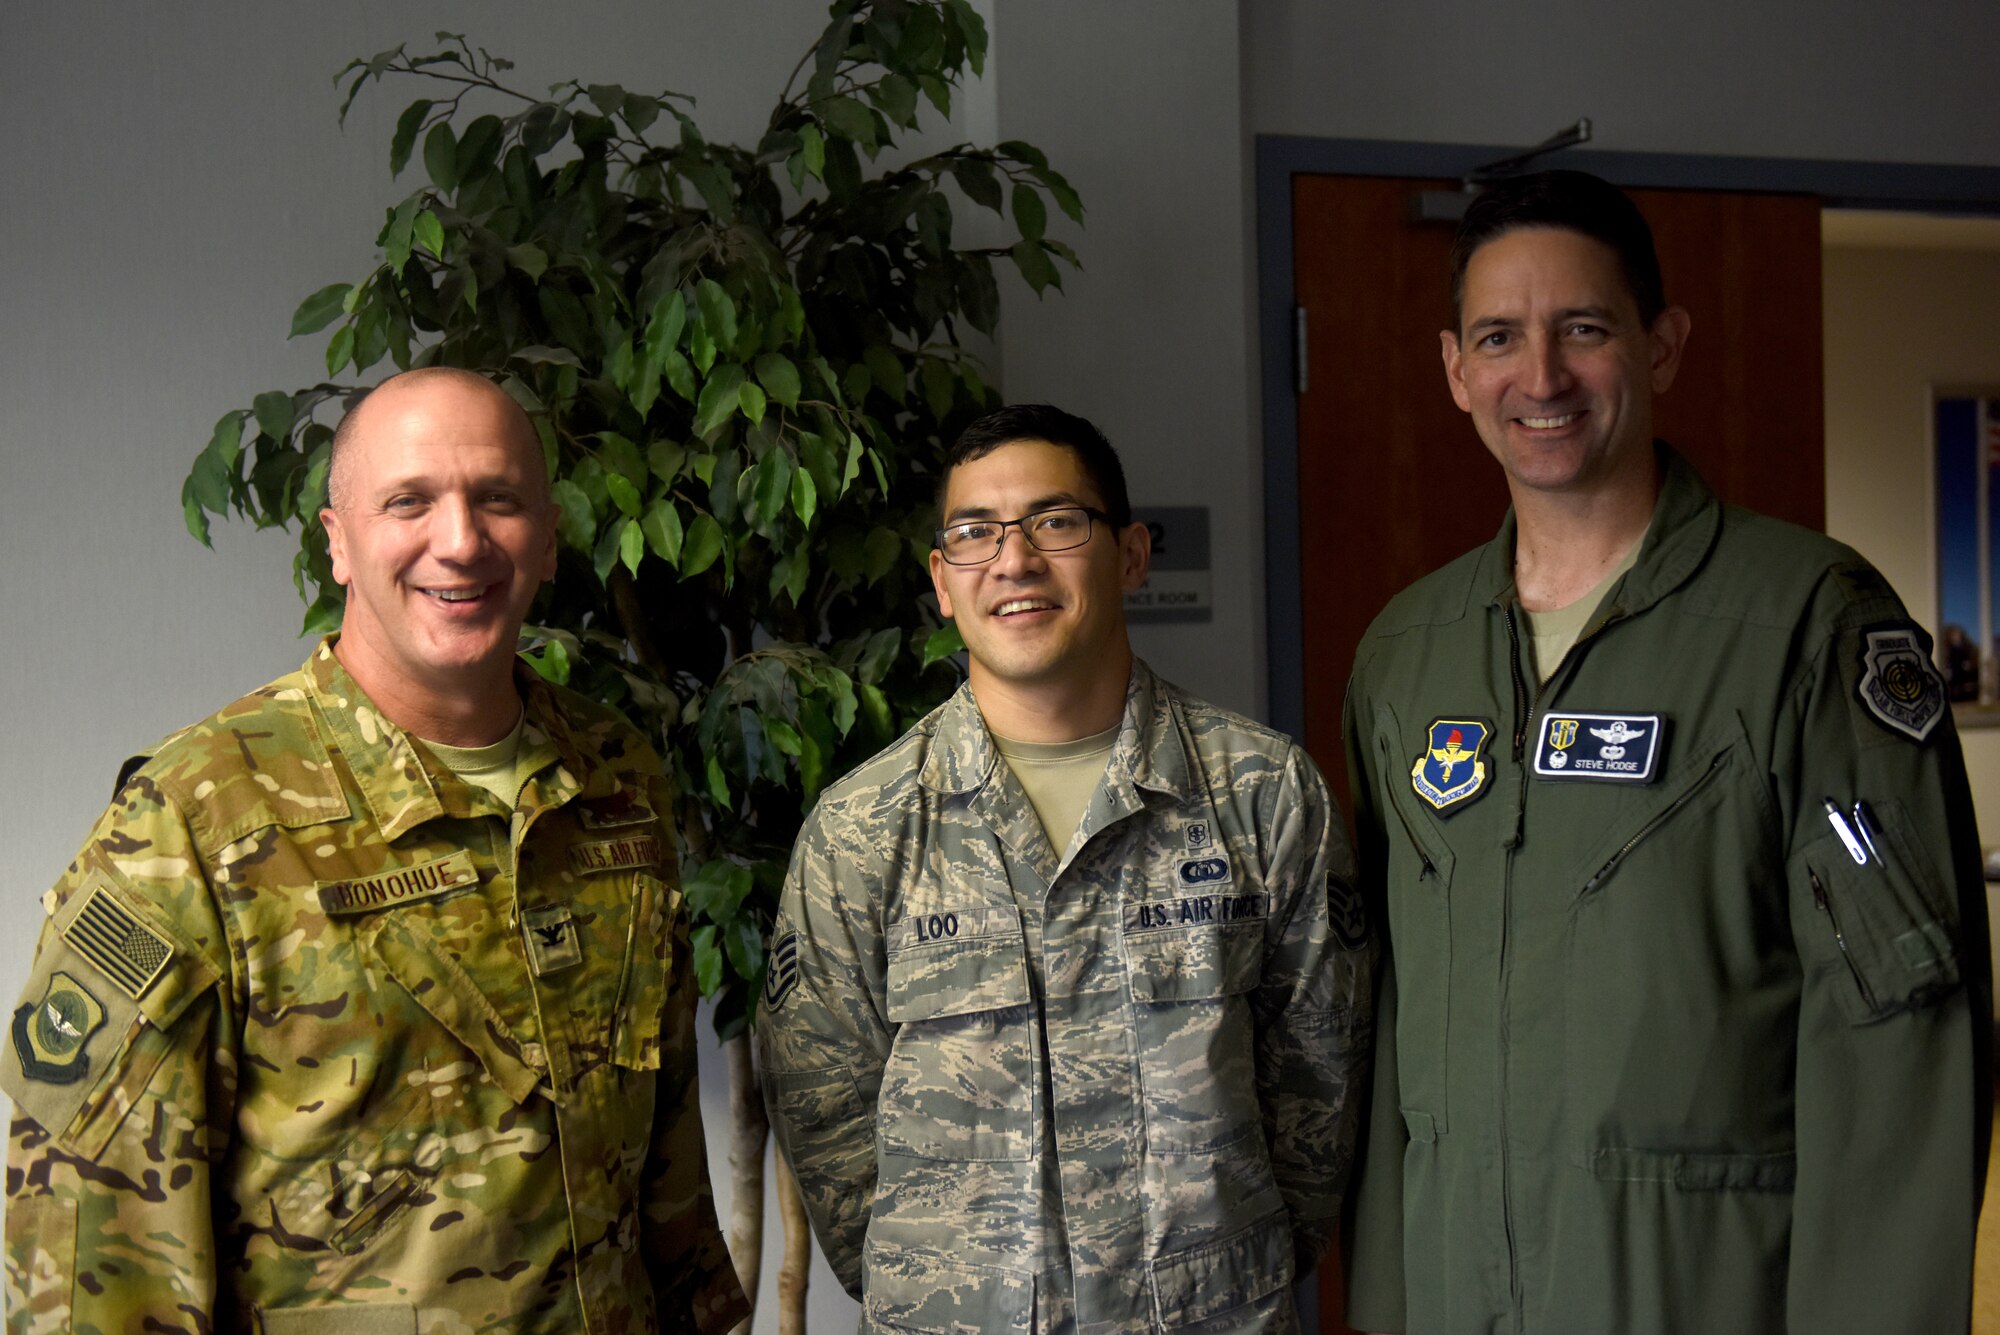 Three men stand smiling at the camera. The farthest left is smiling and wearing the Operational Camouflage Patter uniform, the middle is a man with dark hair and glasses wearing the Airman Battle Uniform and the far right man is wearing a green flight suit.